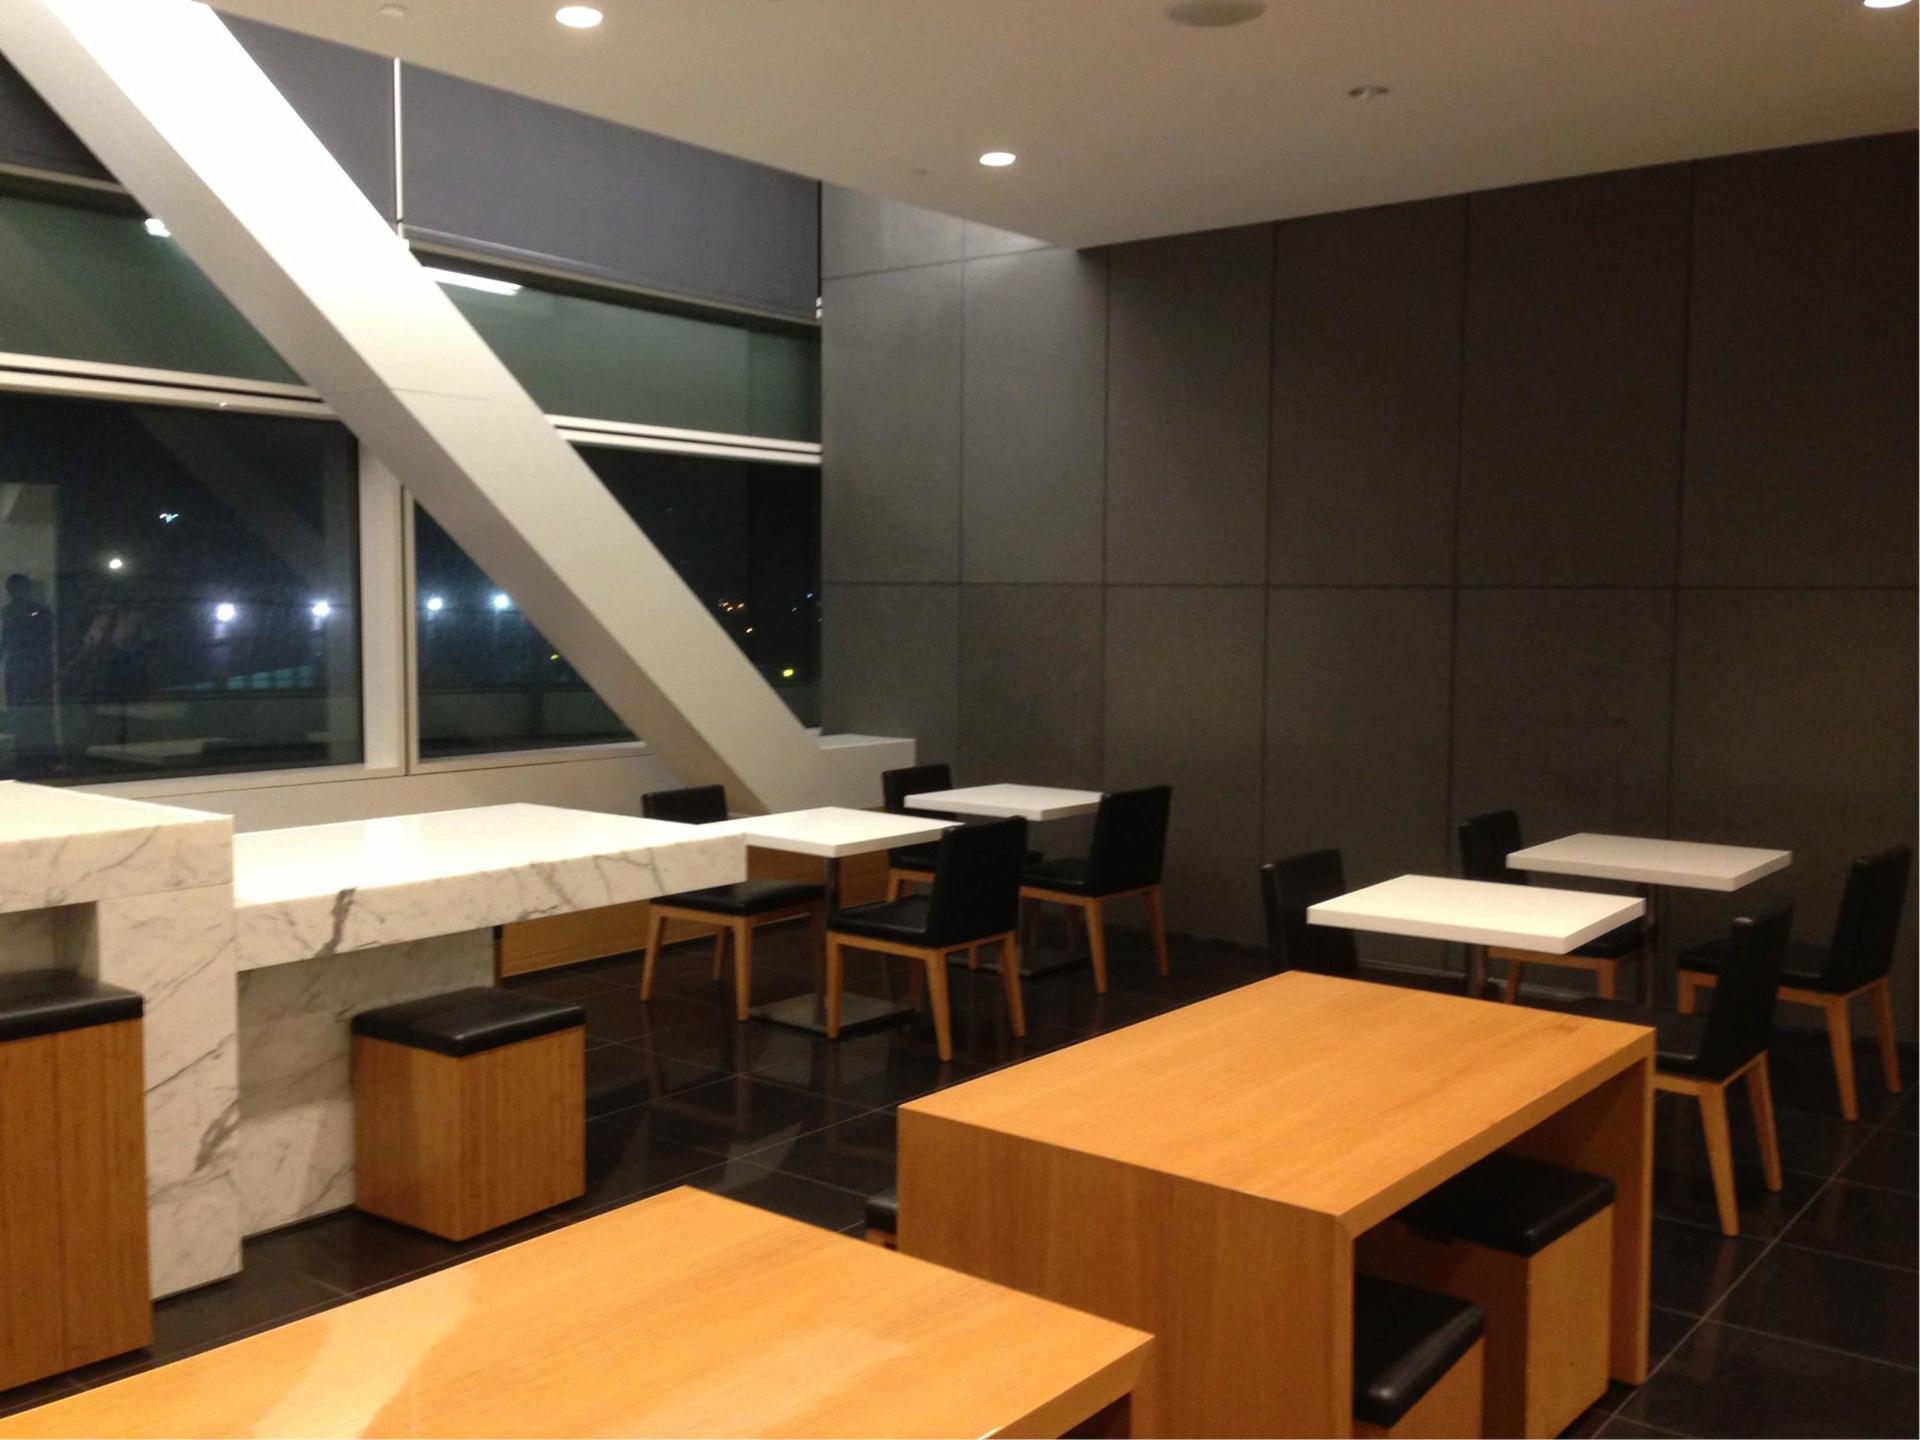 Cathay Pacific First and Business Class Lounge image 15 of 74